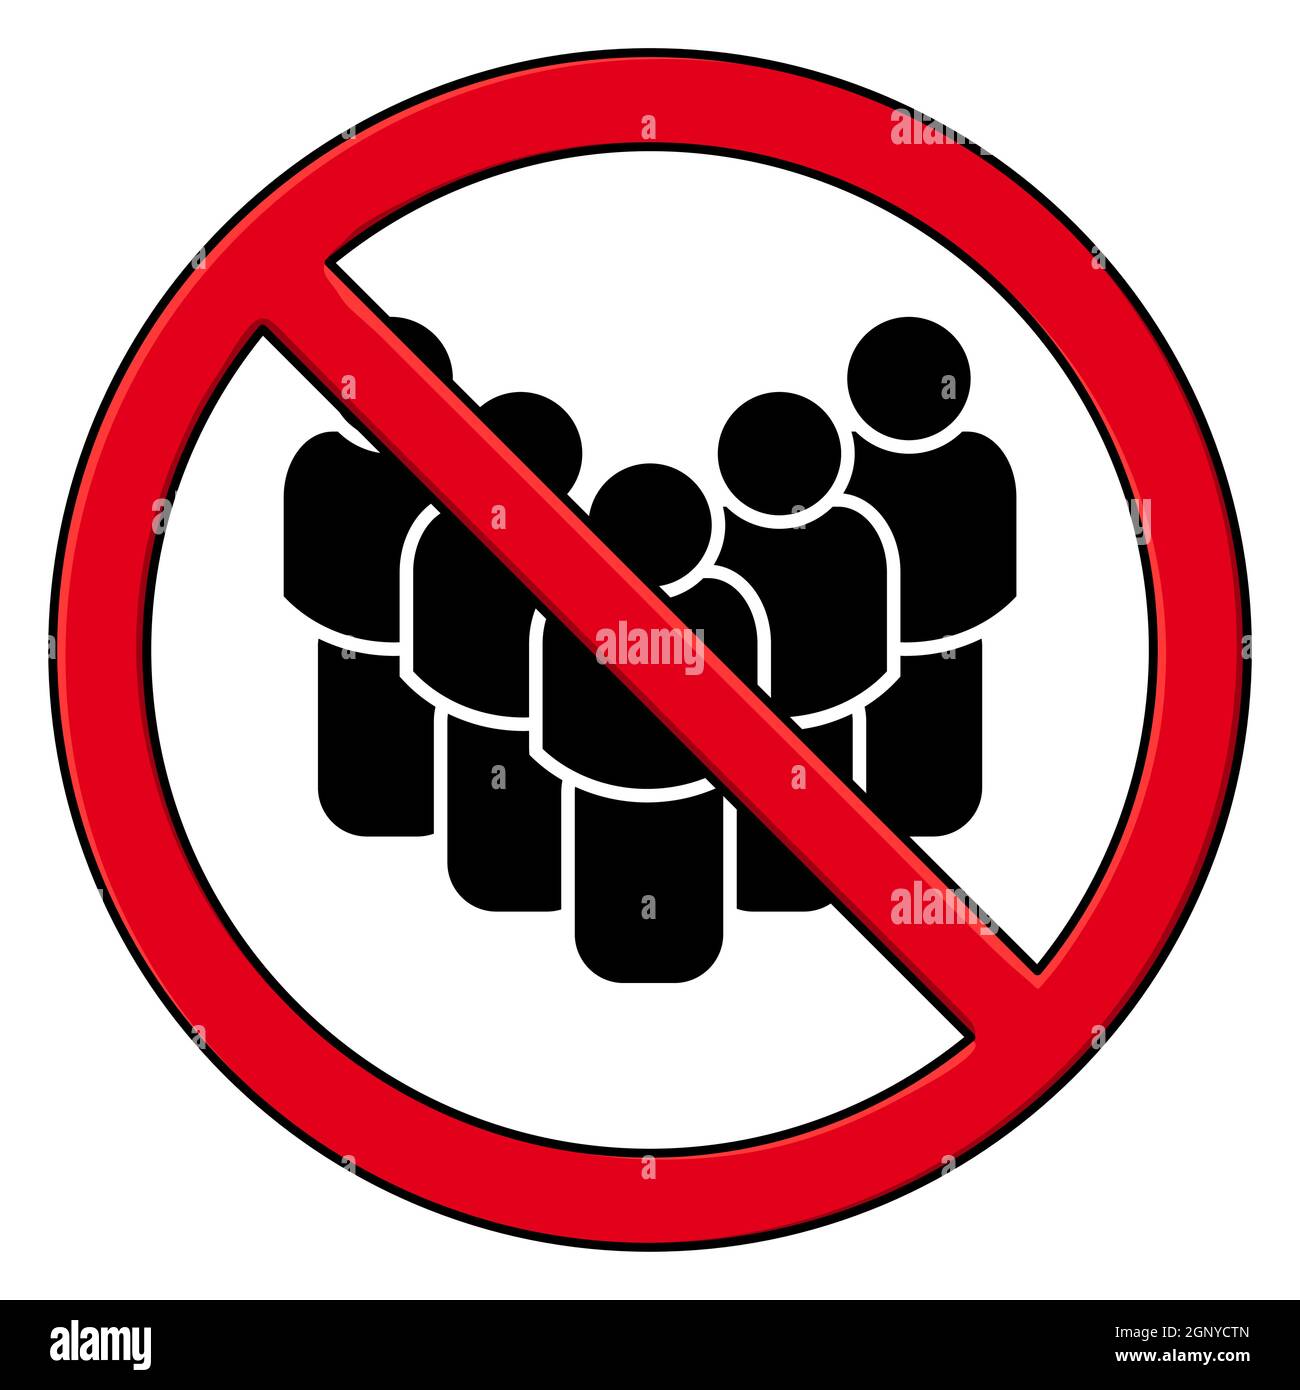 No crowd icon. Group of people drawing in red crossed circle. Social Distancing concept.  Avoid people gathering. Vector prohibited symbol isolated on white background. Stock Vector